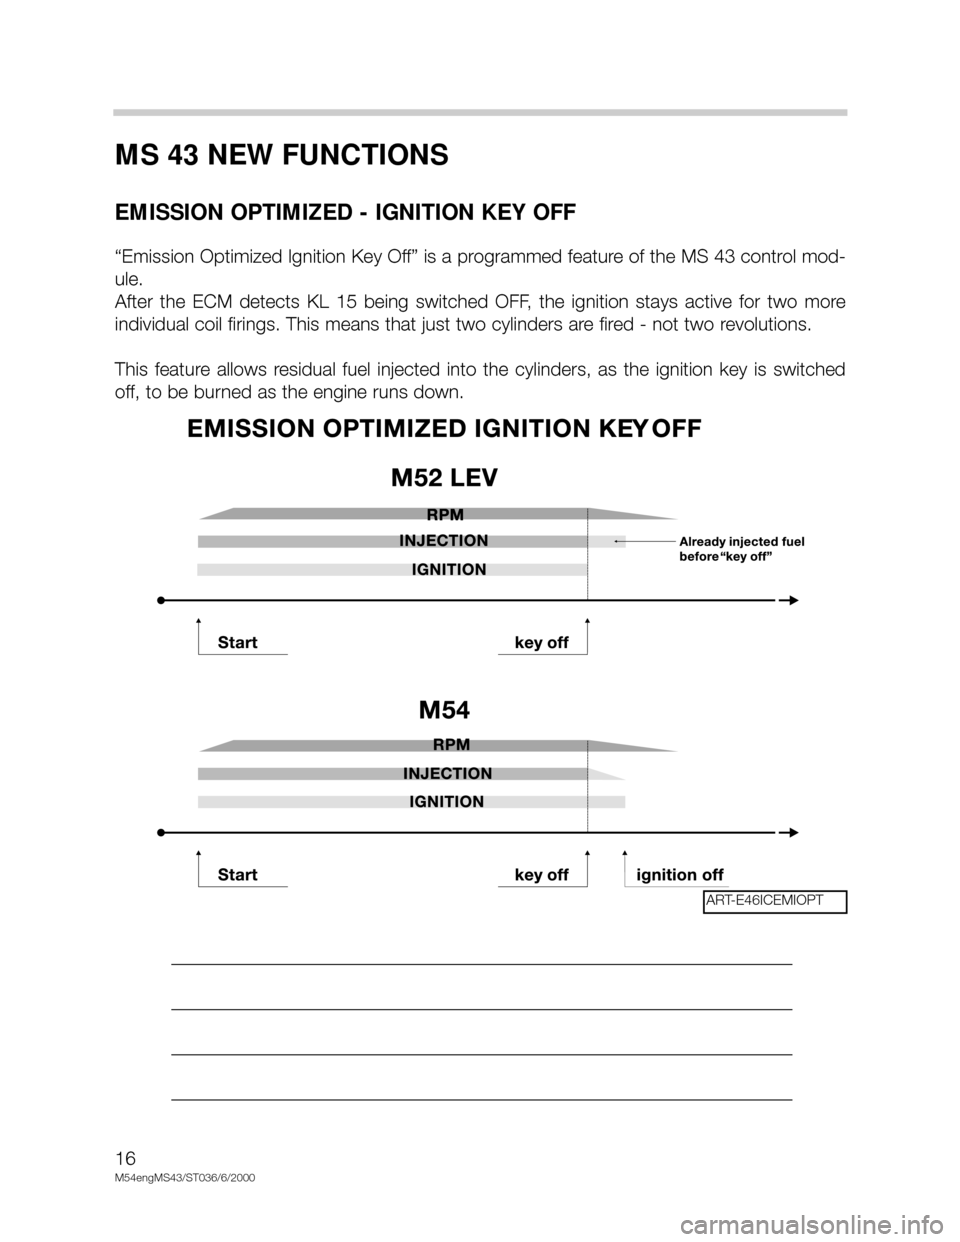 BMW X5 1999 E53 M54 Engine User Guide 16
M54engMS43/ST036/6/2000
MS 43 NEW FUNCTIONS
EMISSION OPTIMIZED - IGNITION KEY OFF
“Emission Optimized Ignition Key Off” is a programmed feature of the MS 43 control mod-
ule. 
After  the  ECM  